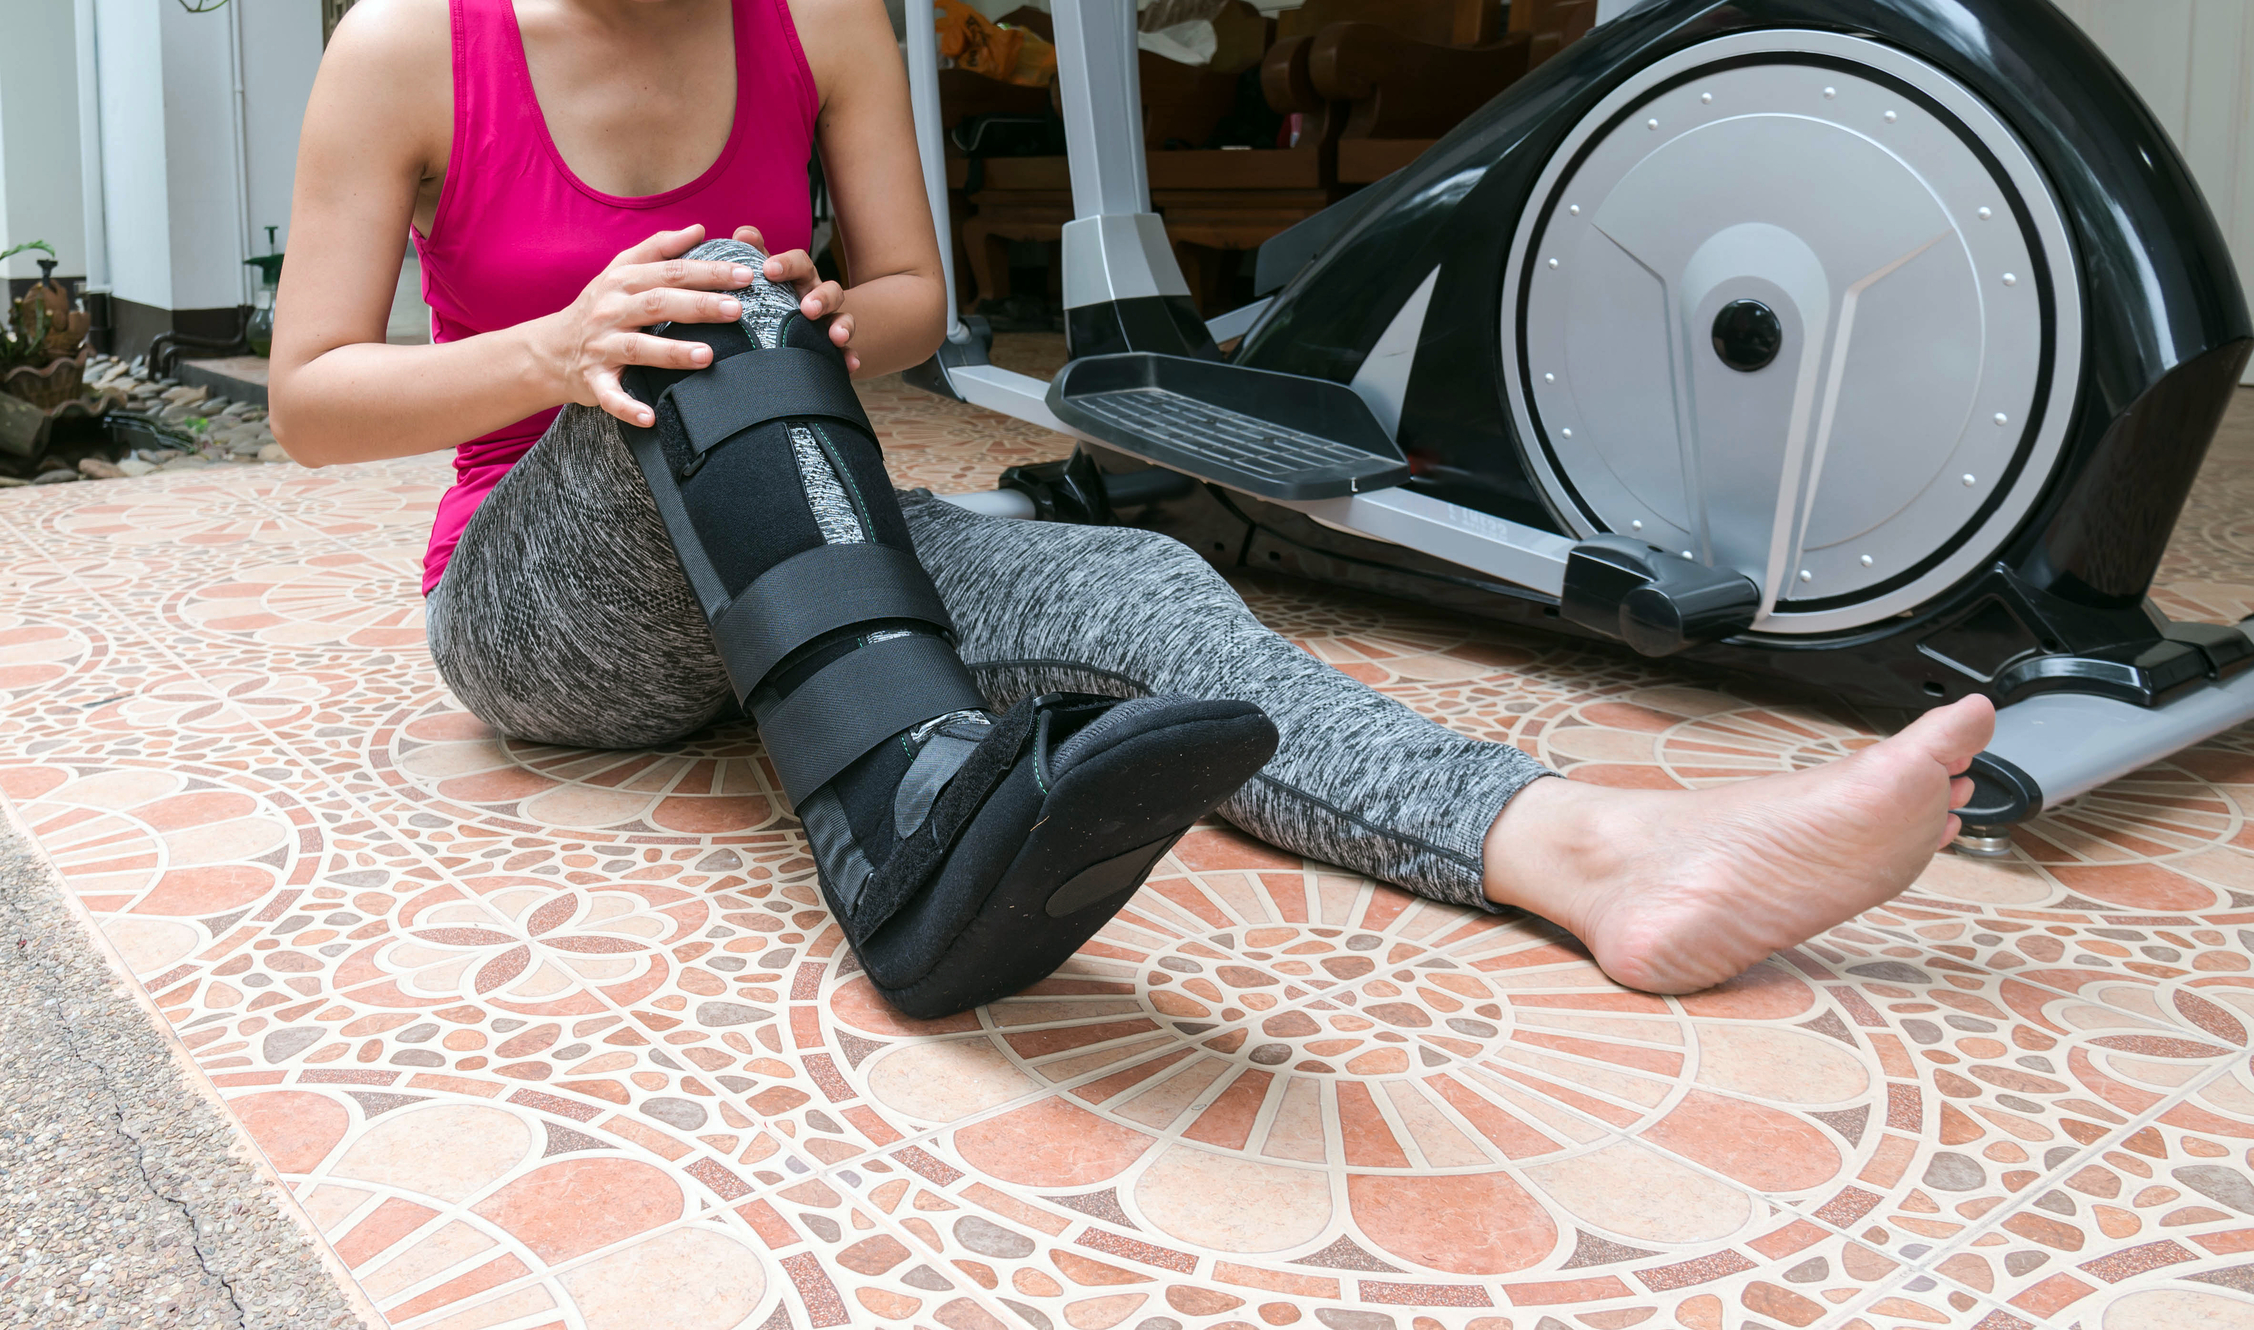 How To Keep Exercising Safely After an Injury